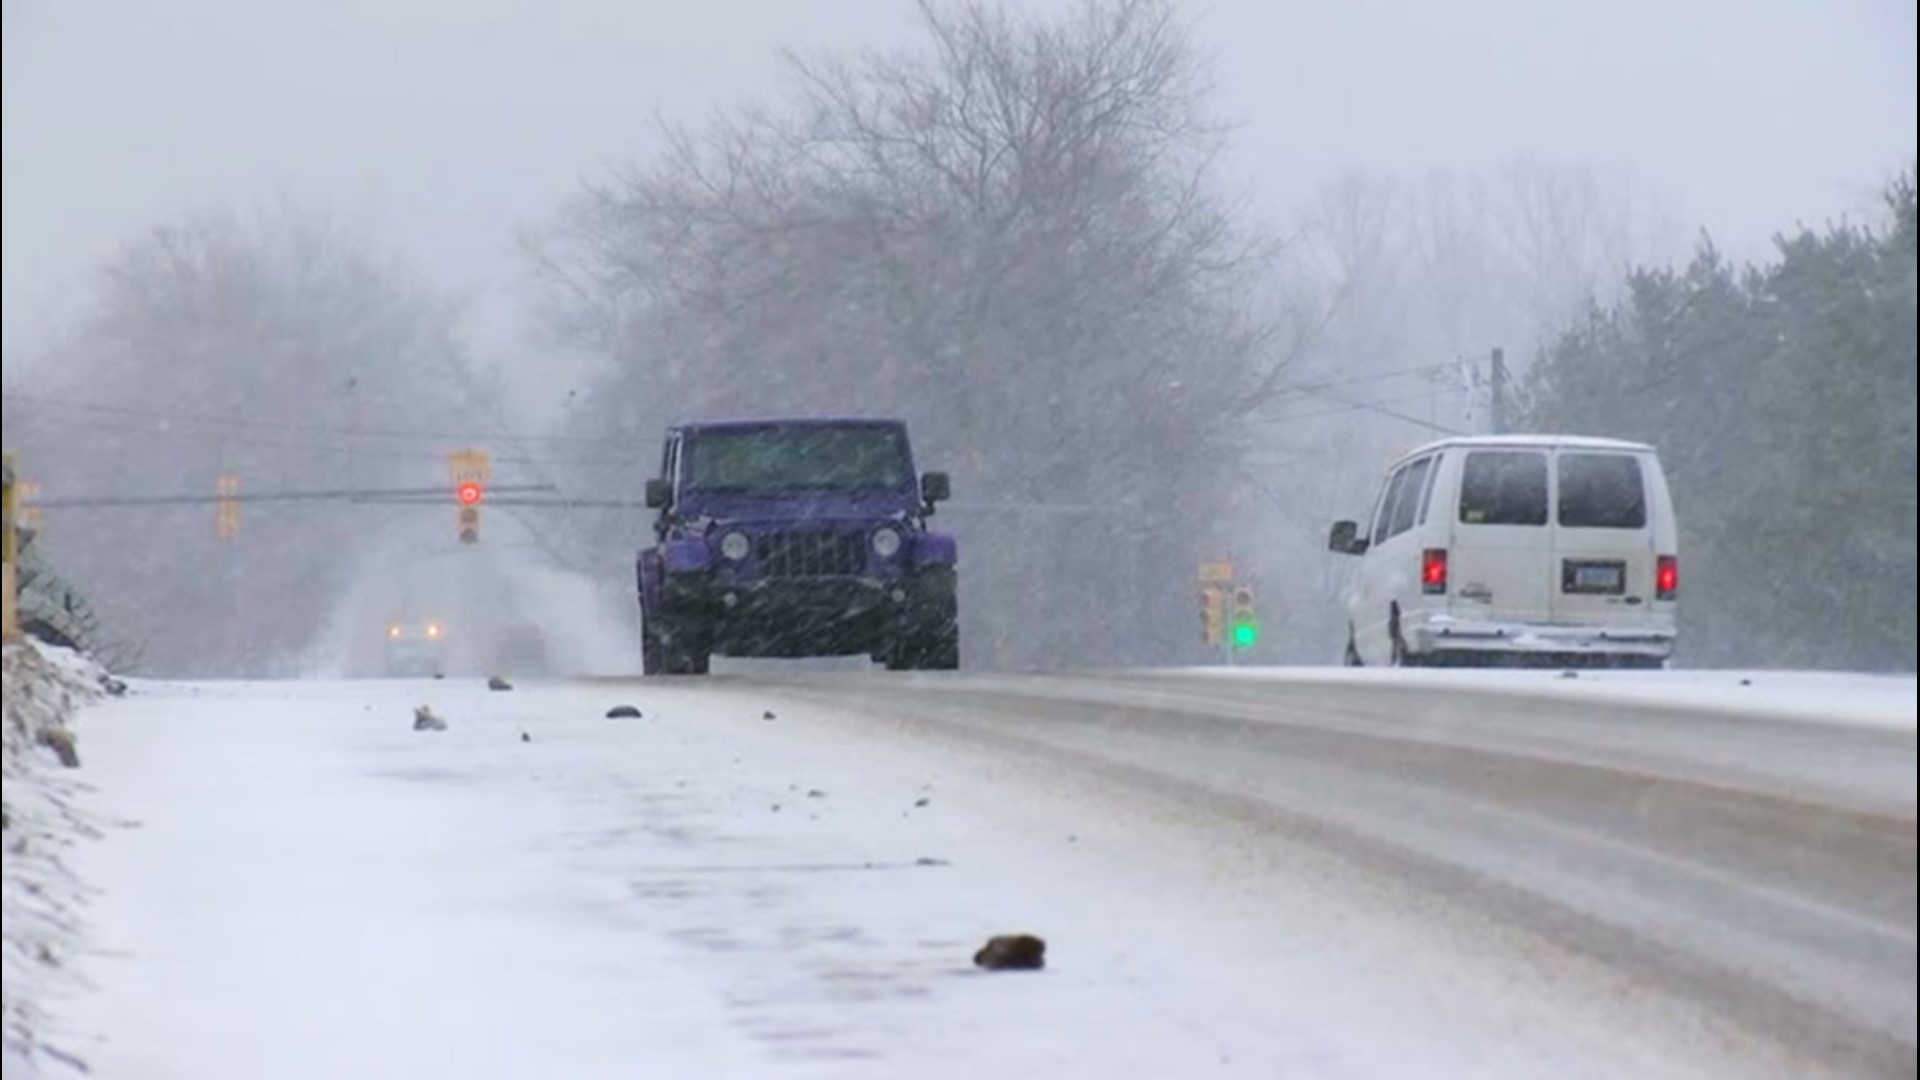 A Winter Weather Advisory was in place in Kalamazoo, Michigan, on the night of Feb. 9 into the next morning as roads were covered in snow.